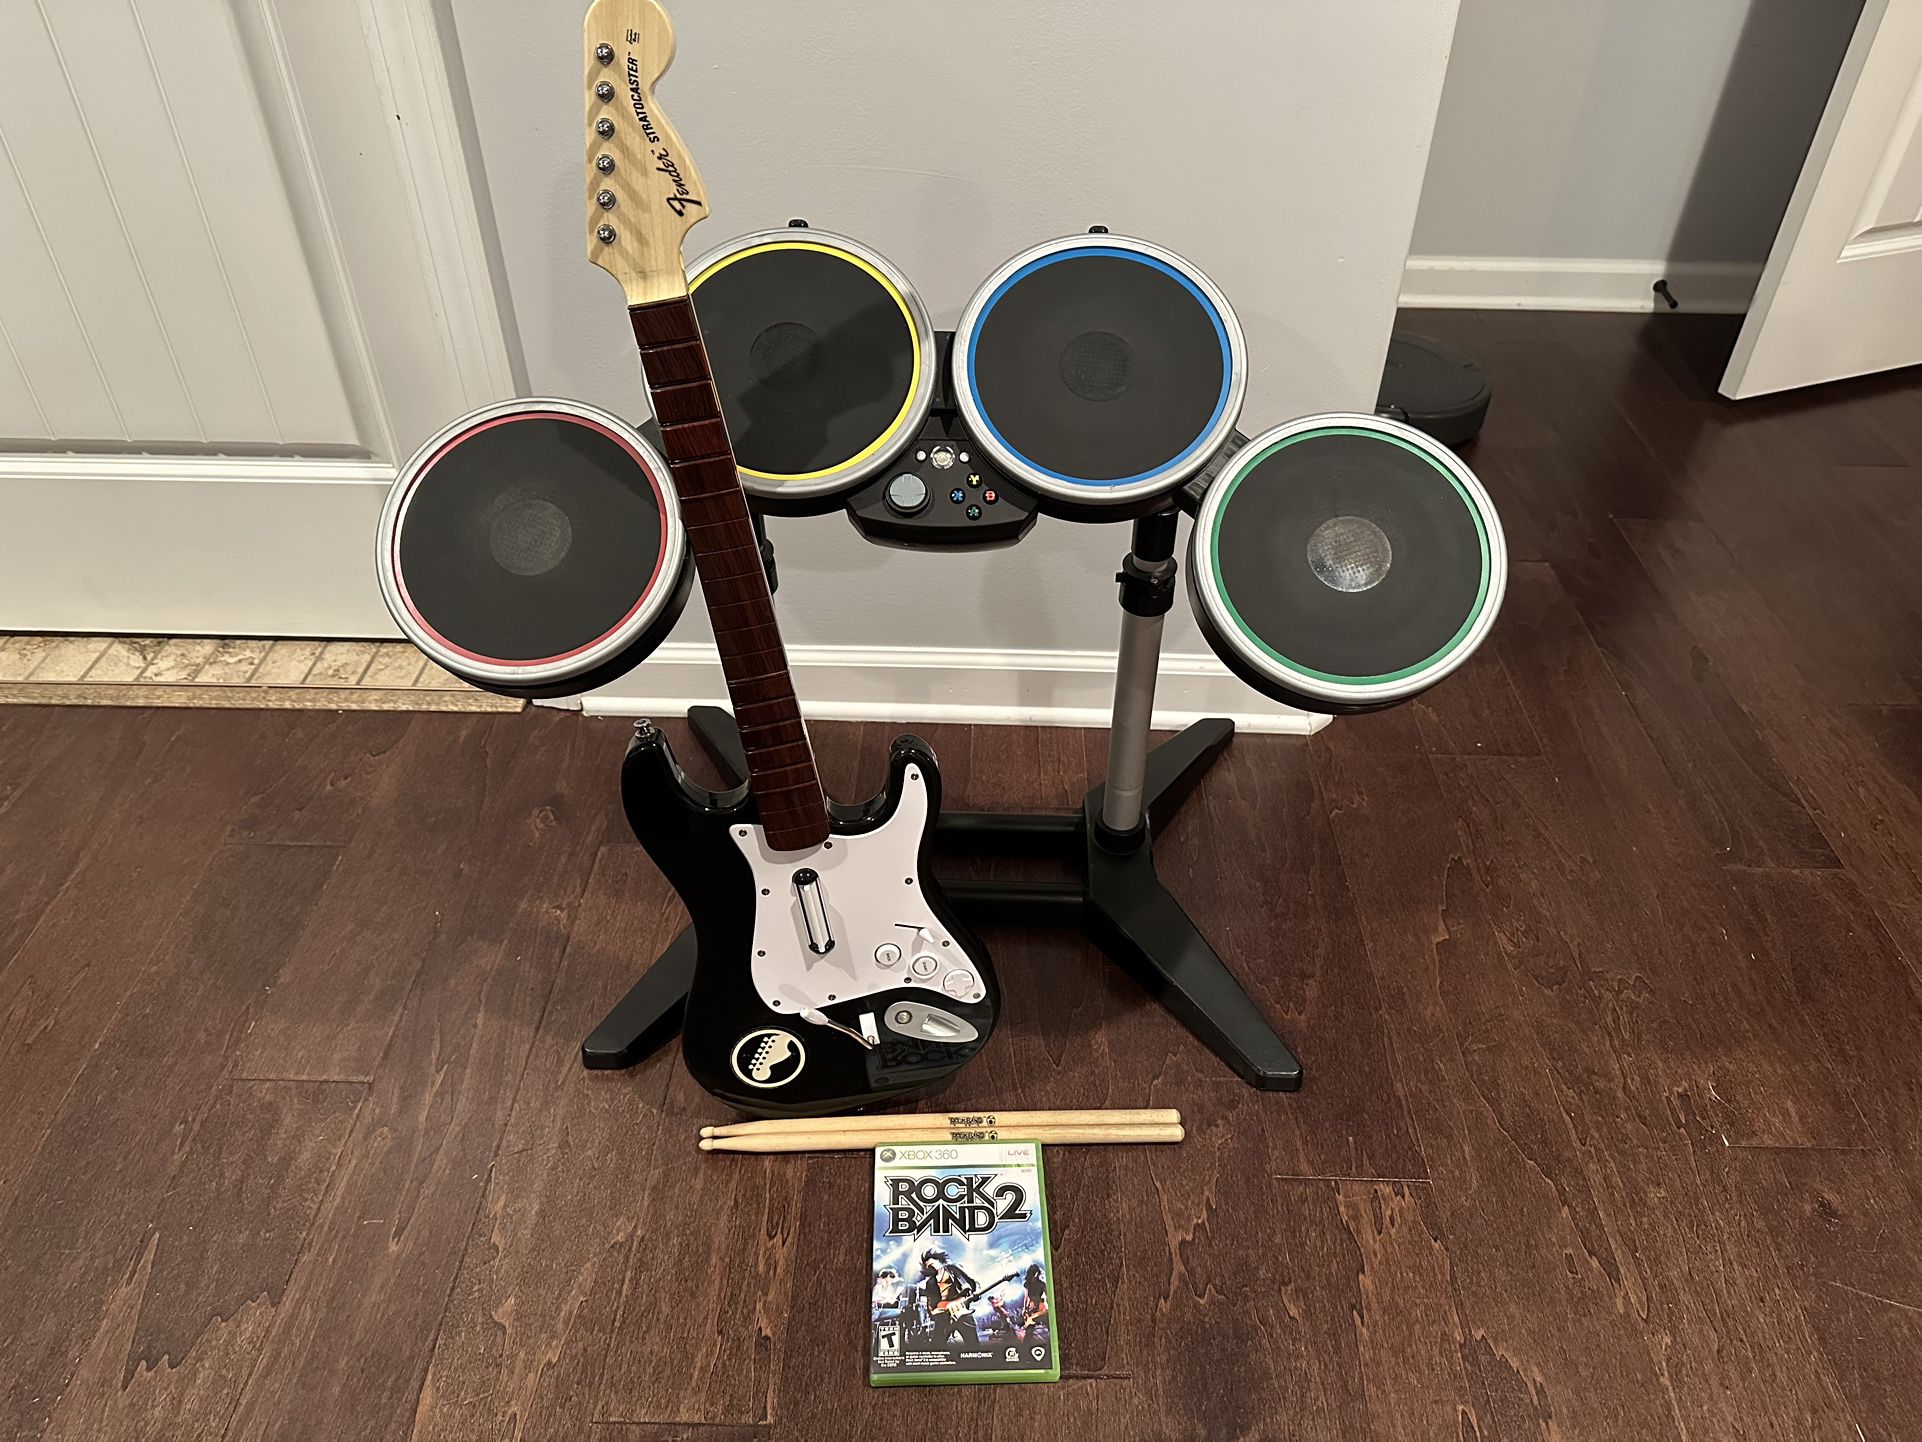 Xbox 360 Rock Band 2 W/ Guitar And Drums